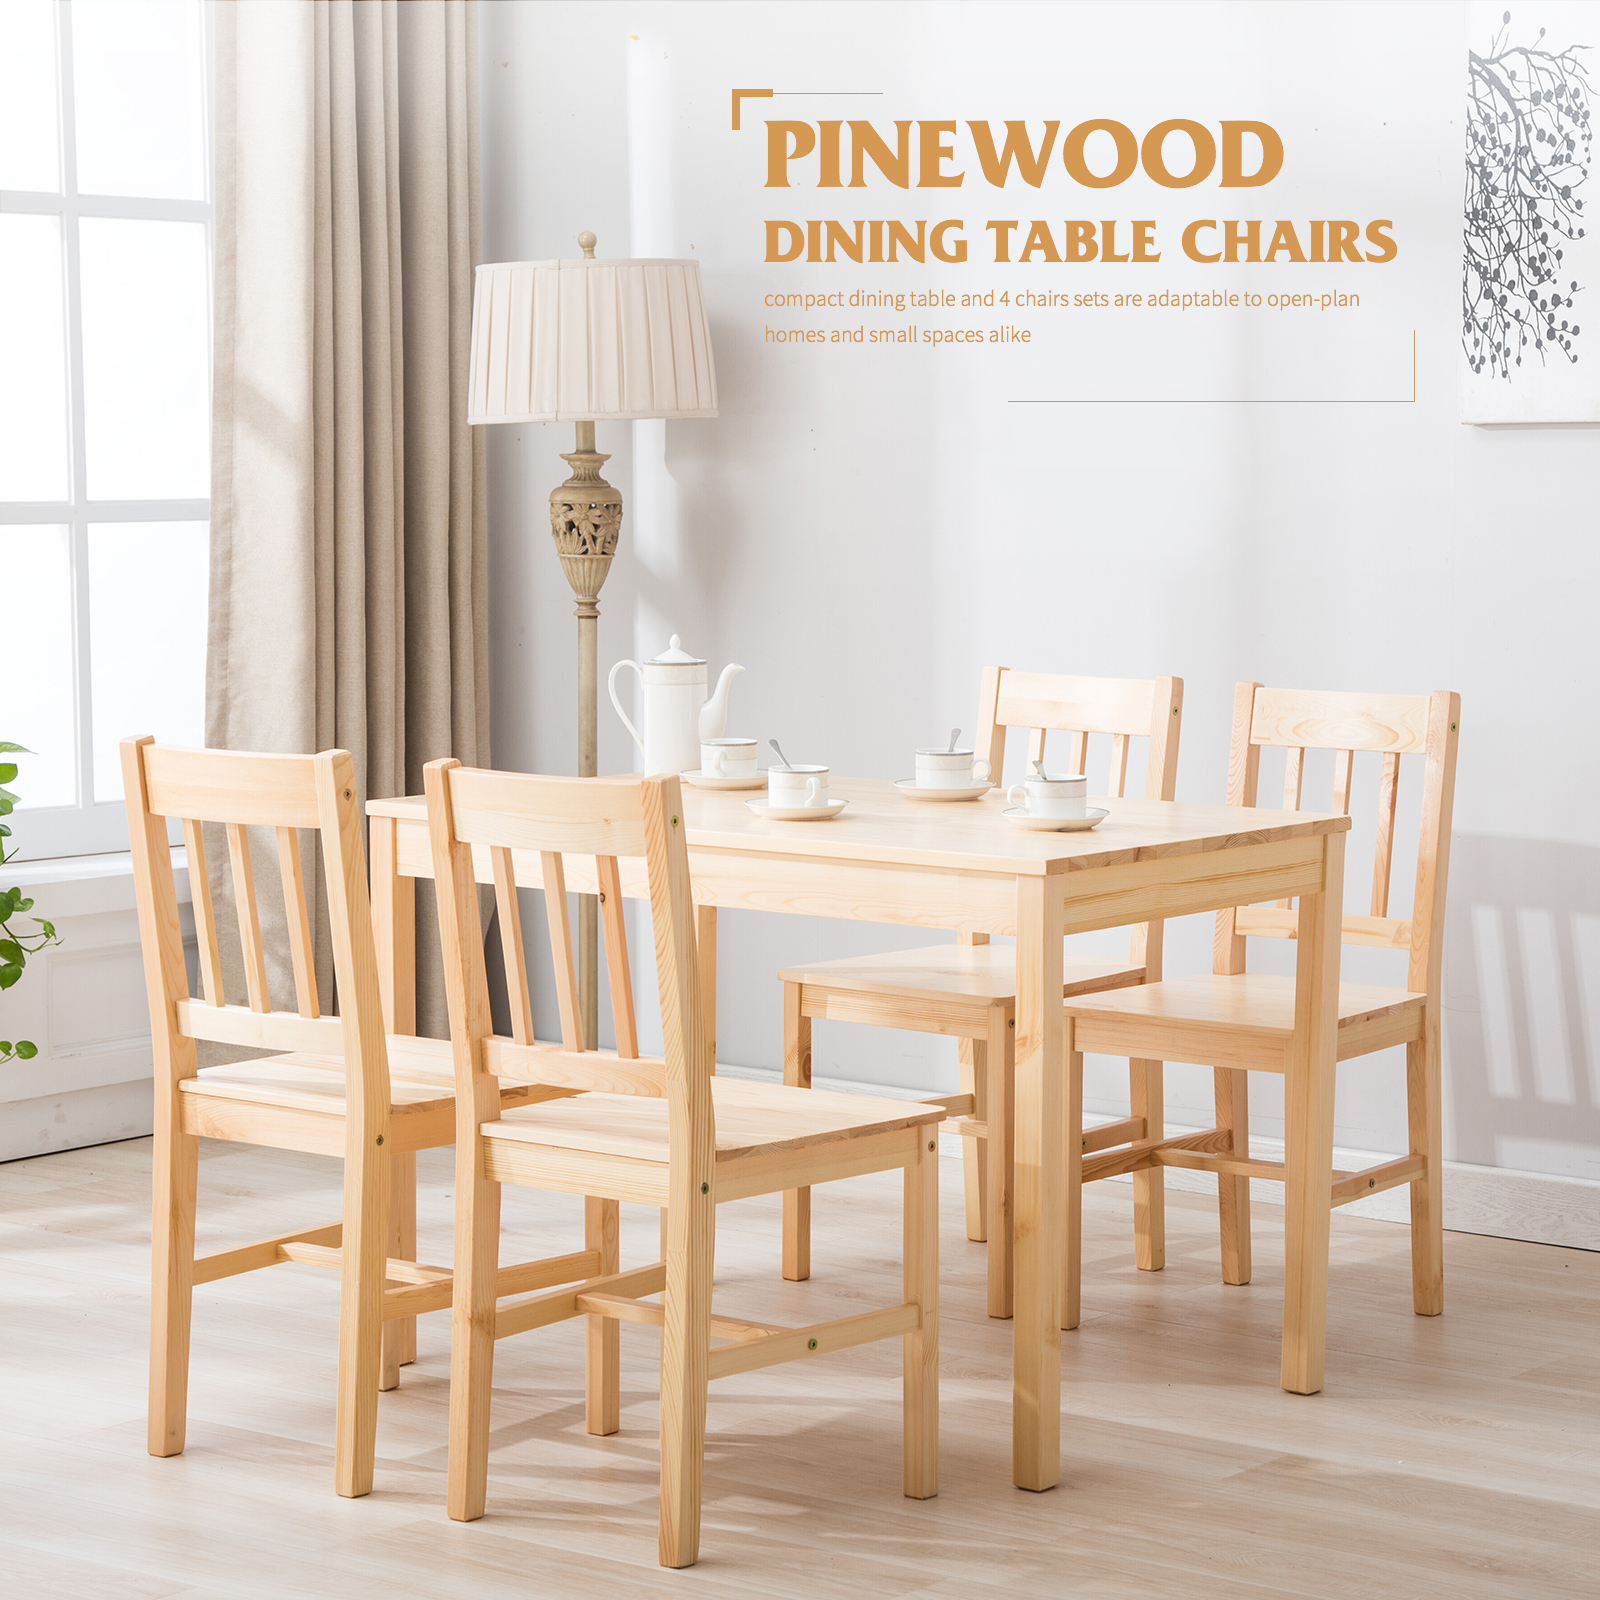 Chair Wondrous Kitchen Table And Chair Sets With regarding dimensions 1600 X 1600